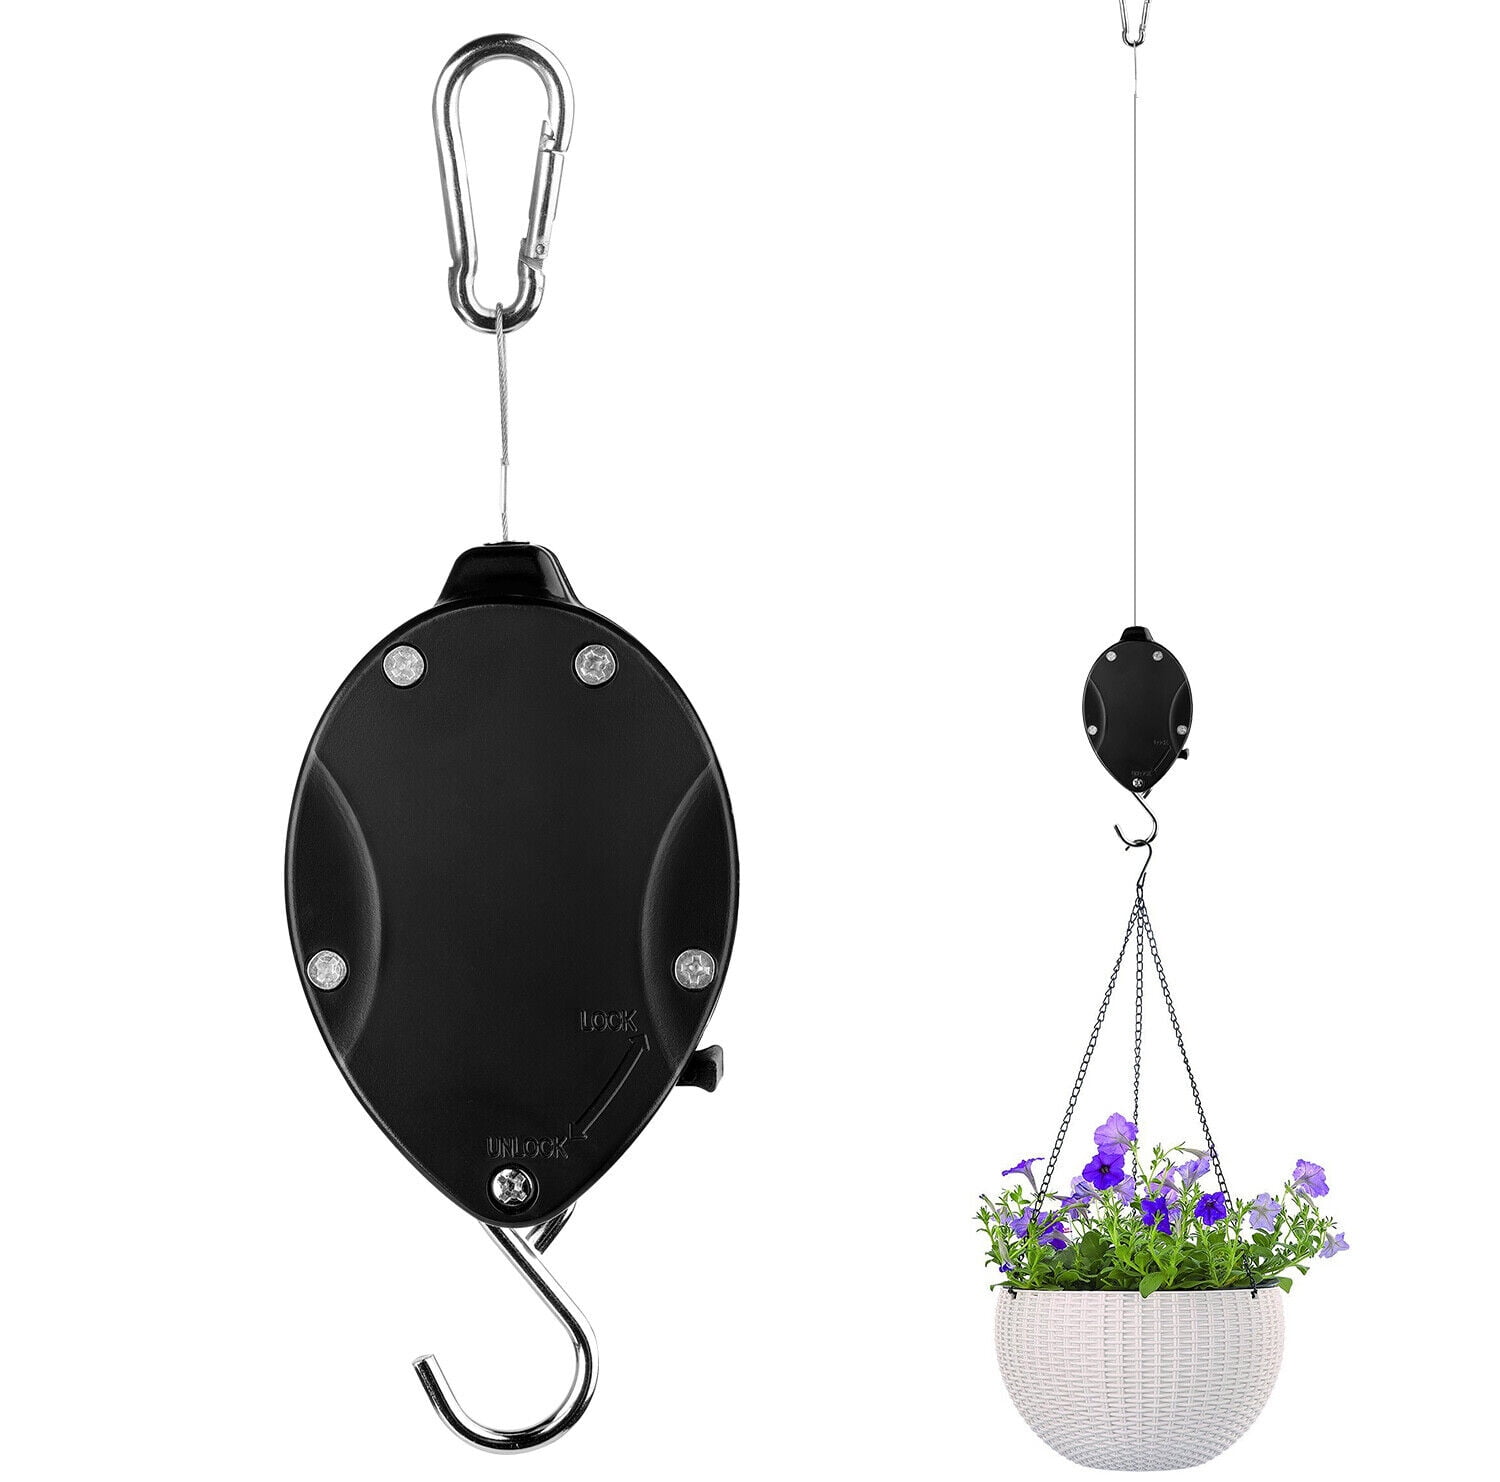 Strong Retractable Hanging Basket Pulley Pull Down Plant Yard